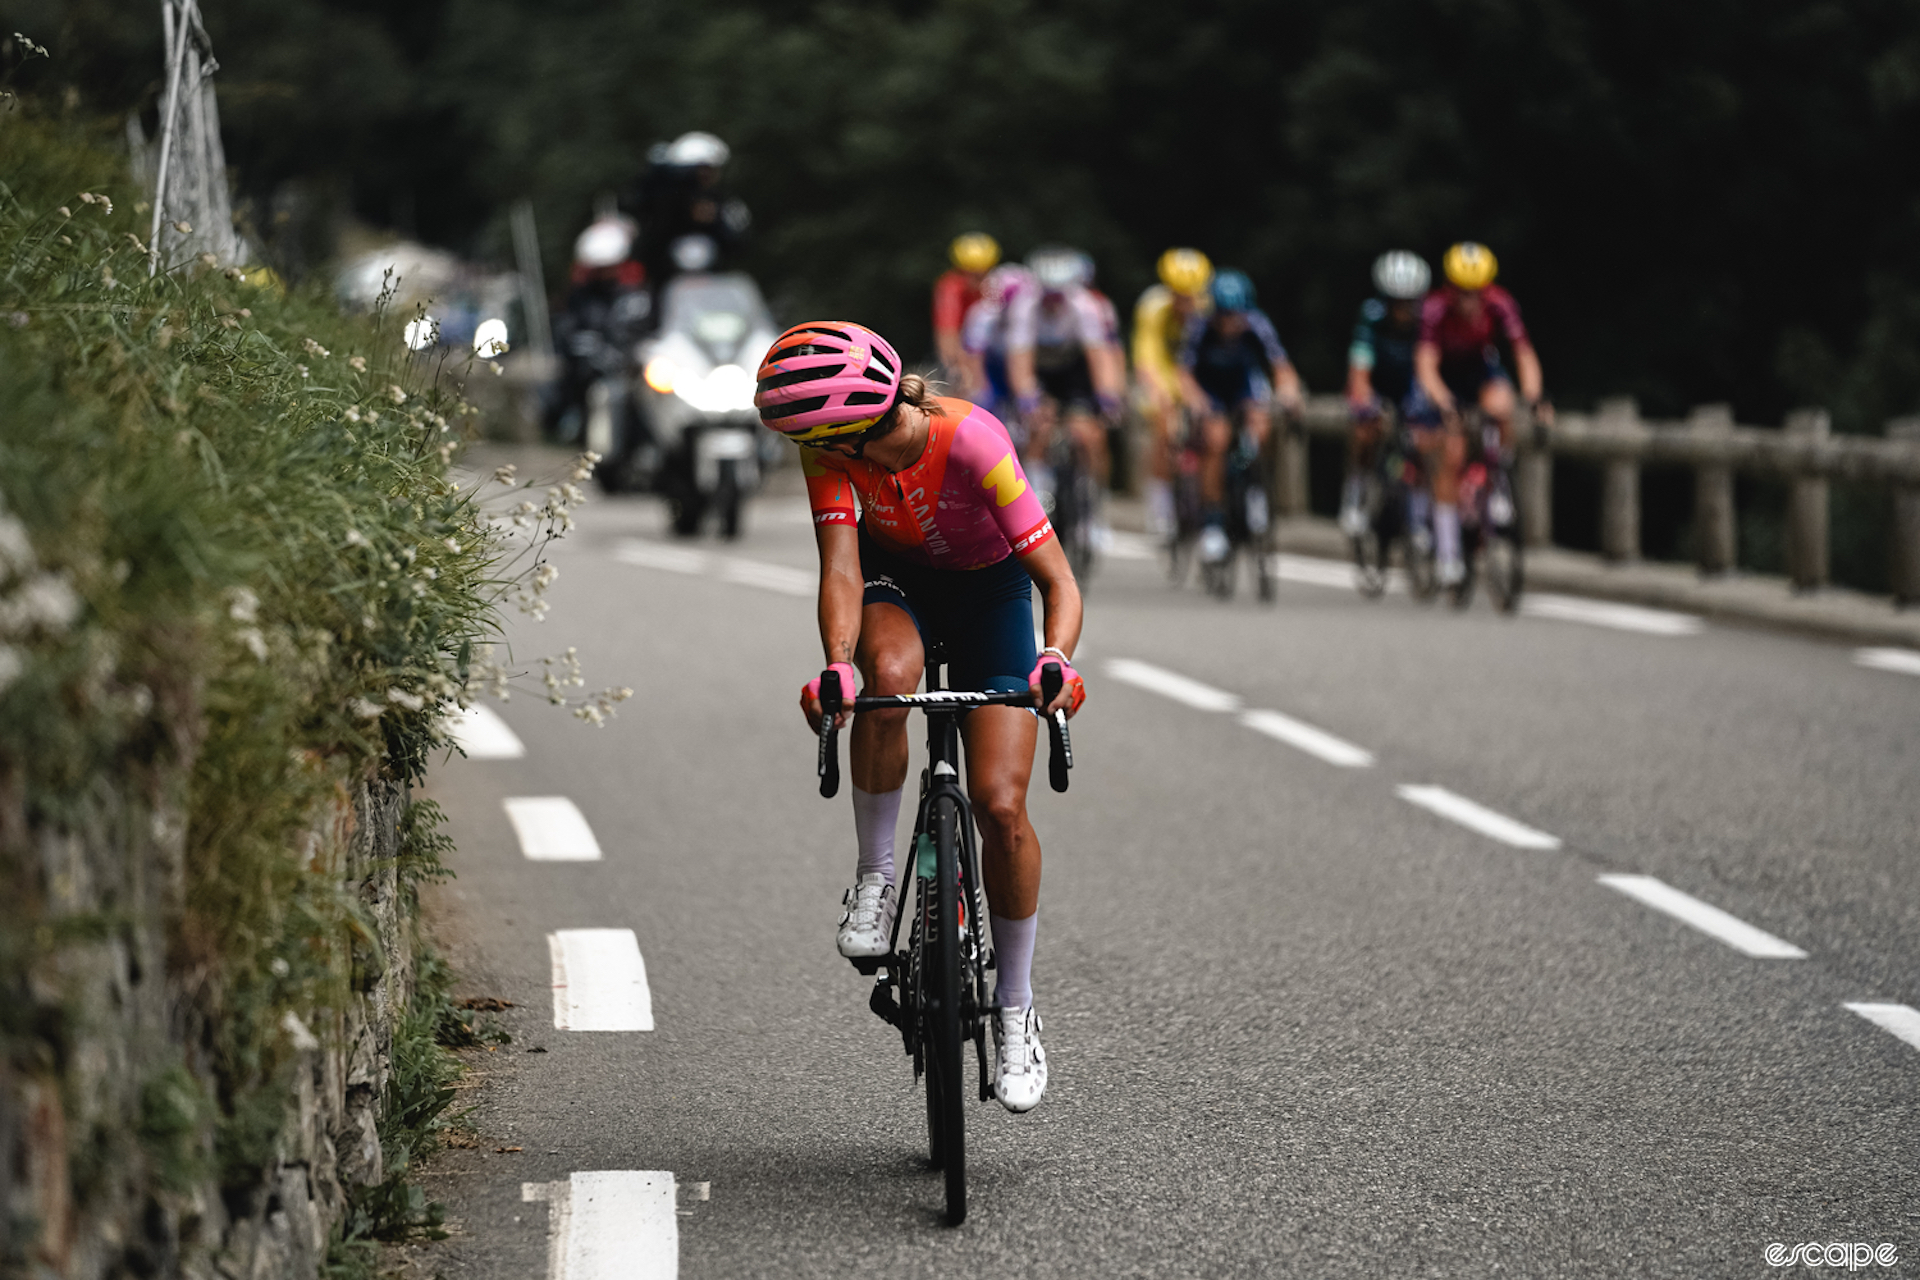 Kasia Niewiadoma looks back at the chase on stage 7 of the Tour de France.